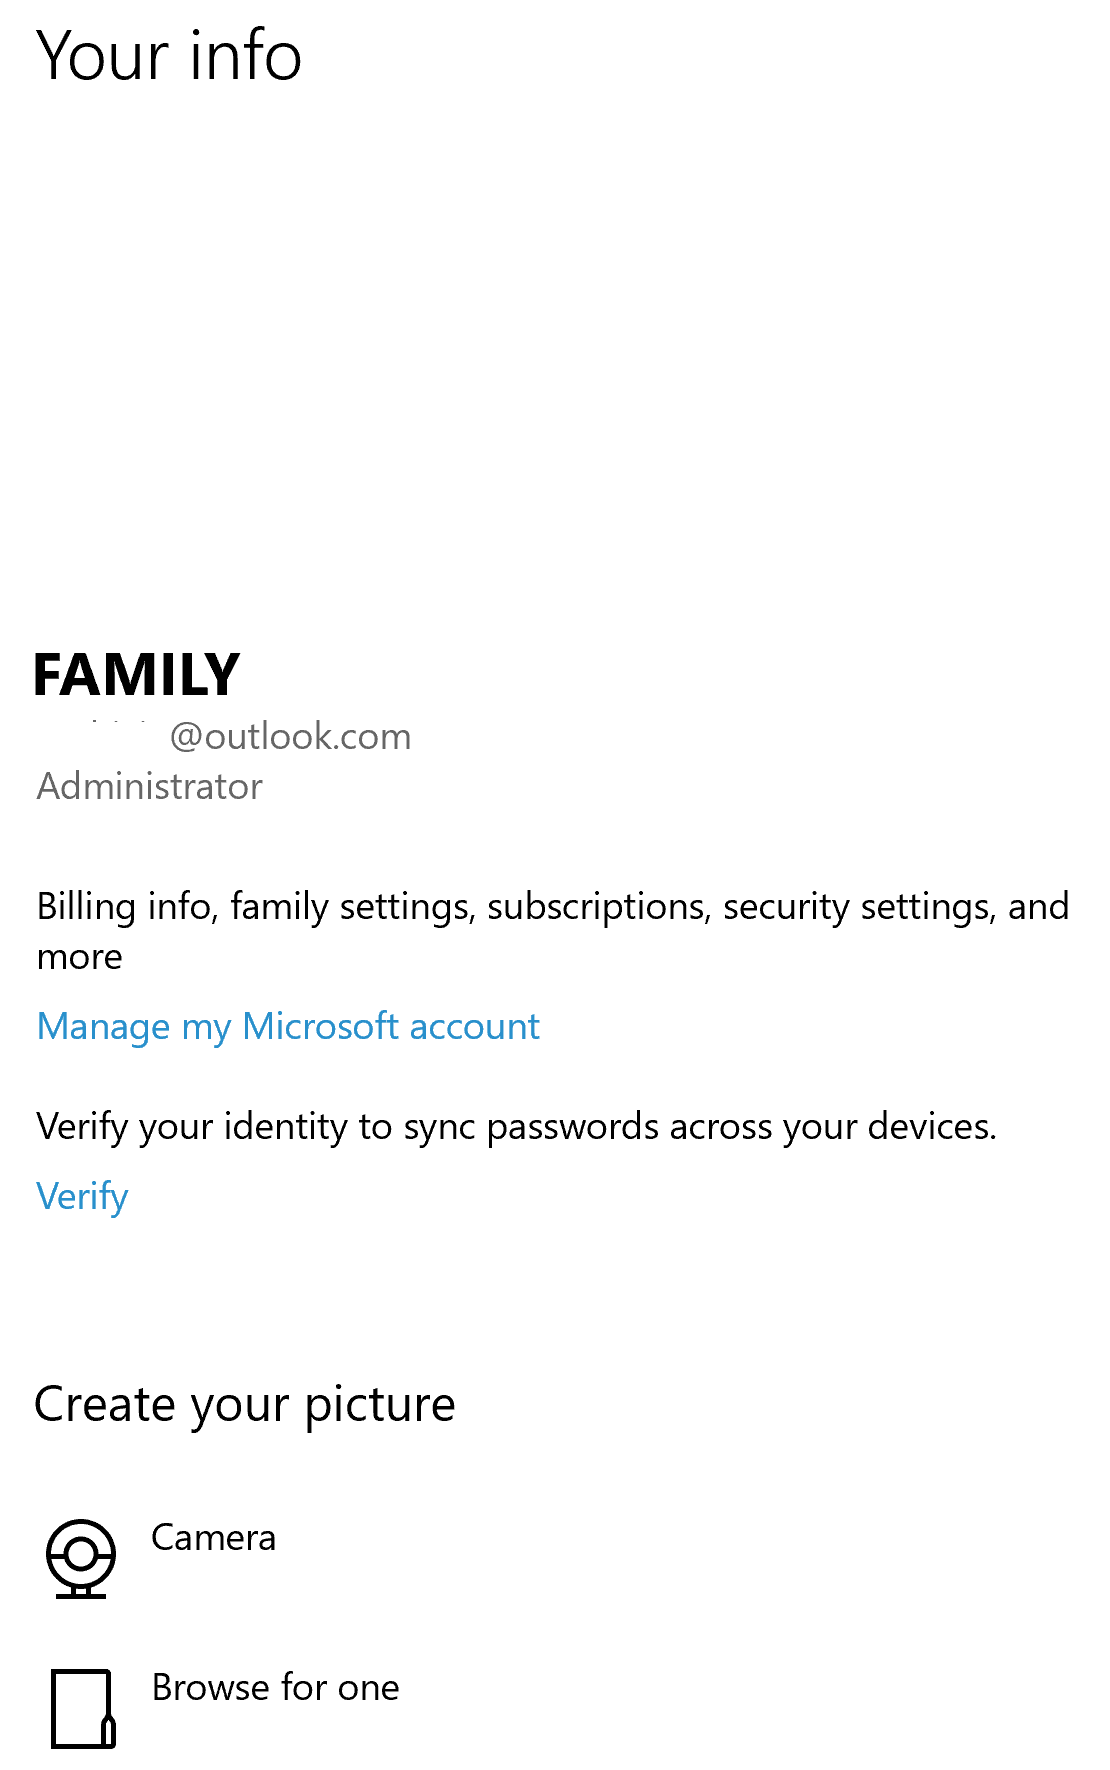 Windows10 Family safety is blocking my laptop local admin login apps 64598b66-ca2d-4271-b55c-e32a1710041f?upload=true.png